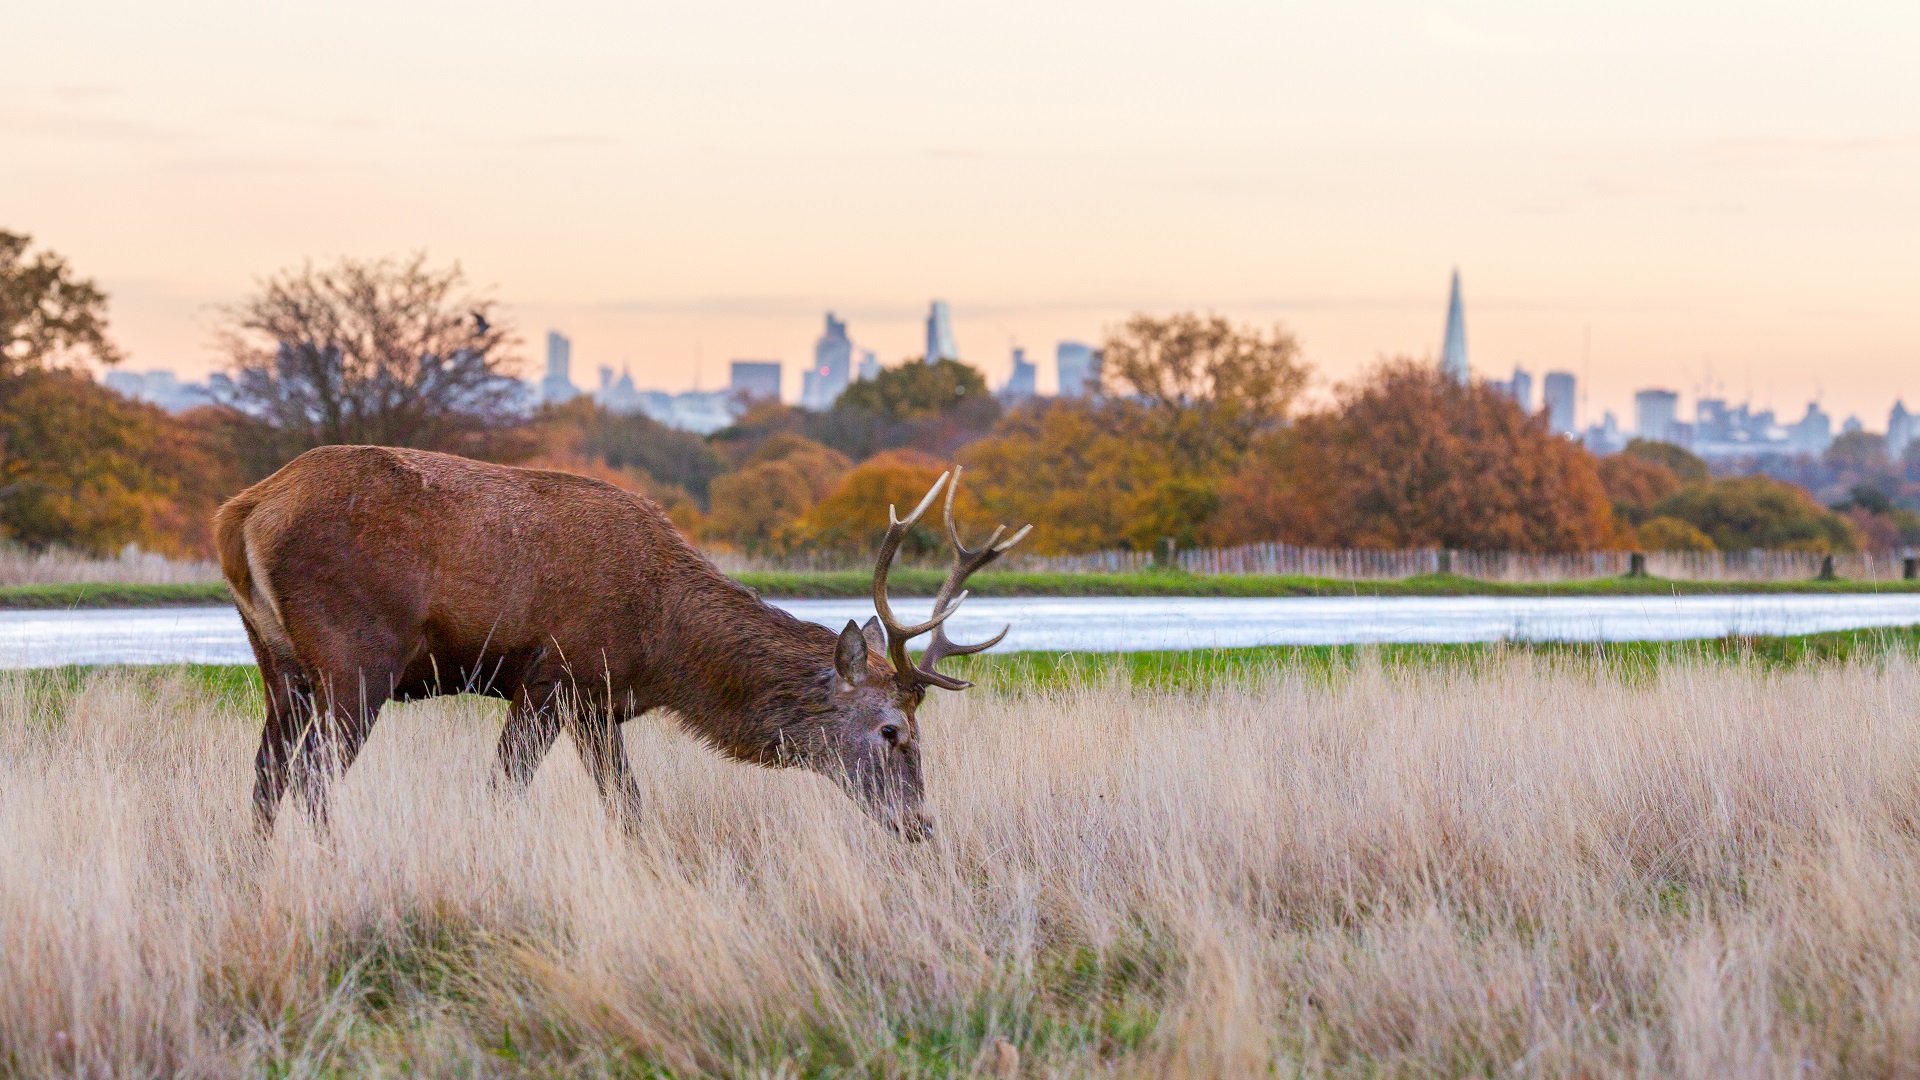 A grazing deer in Richmond park with view of London behind it